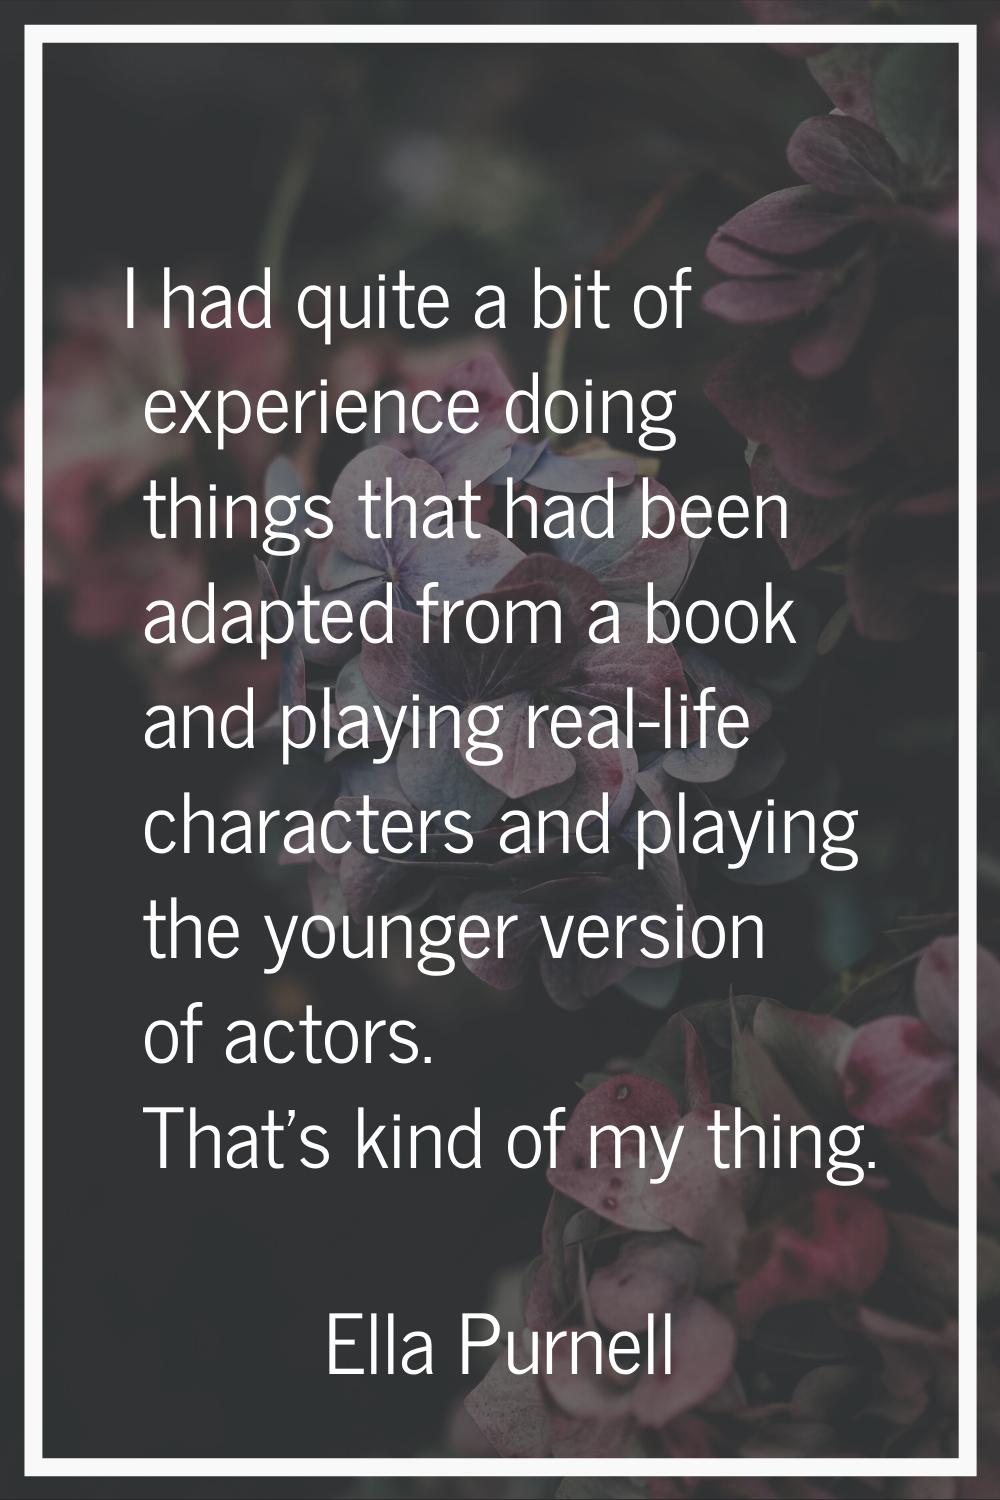 I had quite a bit of experience doing things that had been adapted from a book and playing real-lif